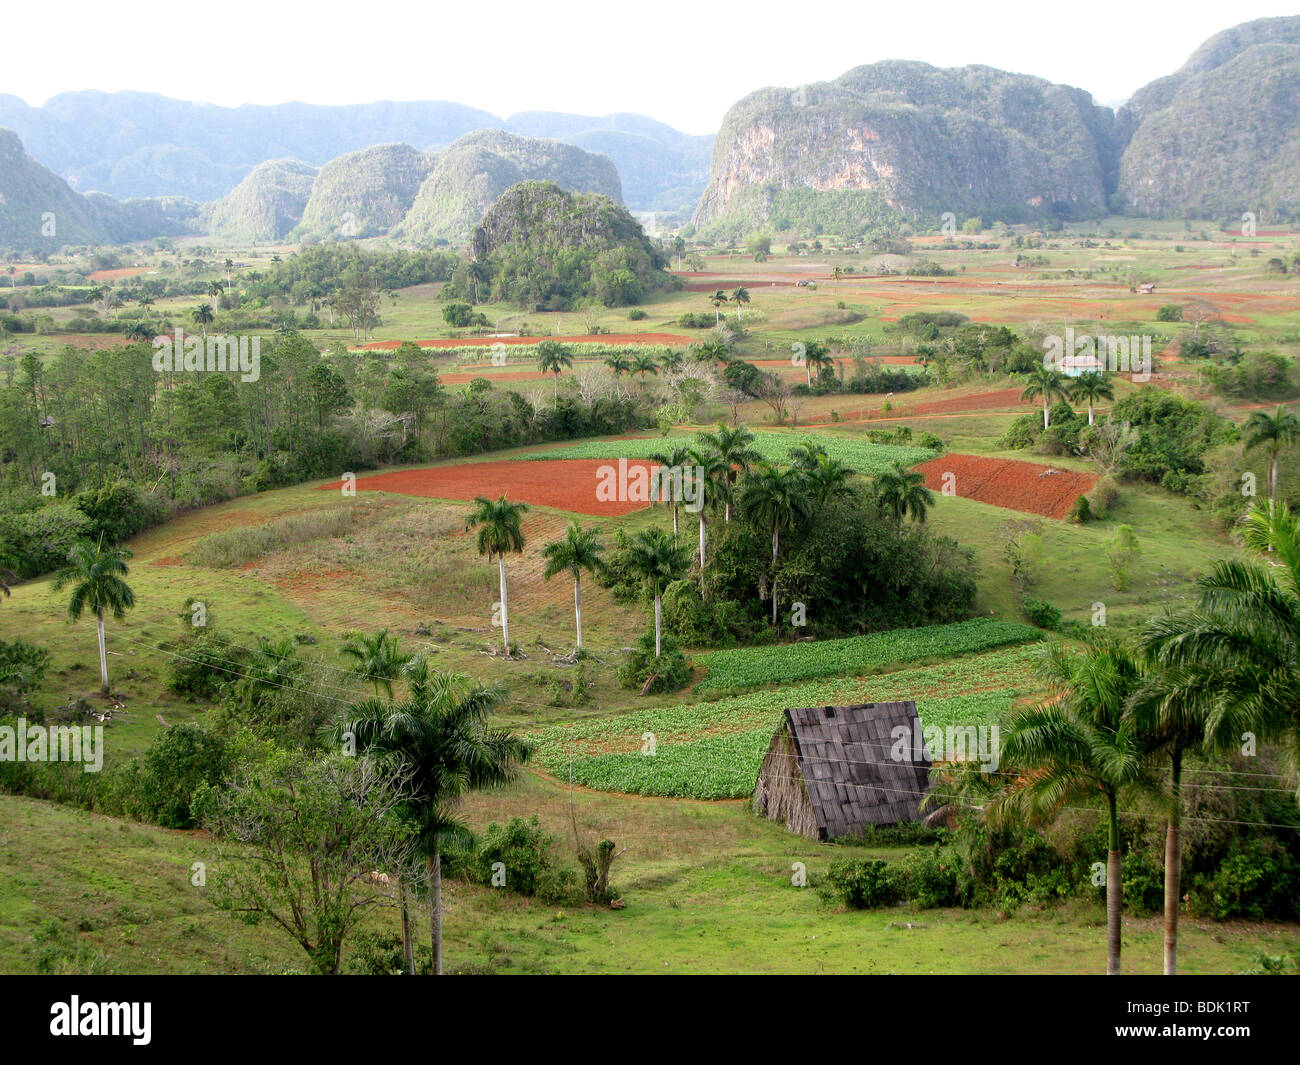 Tobacco fields for Pinar del Rio cigars among agricultural landscape. Cuba. Stock Photo